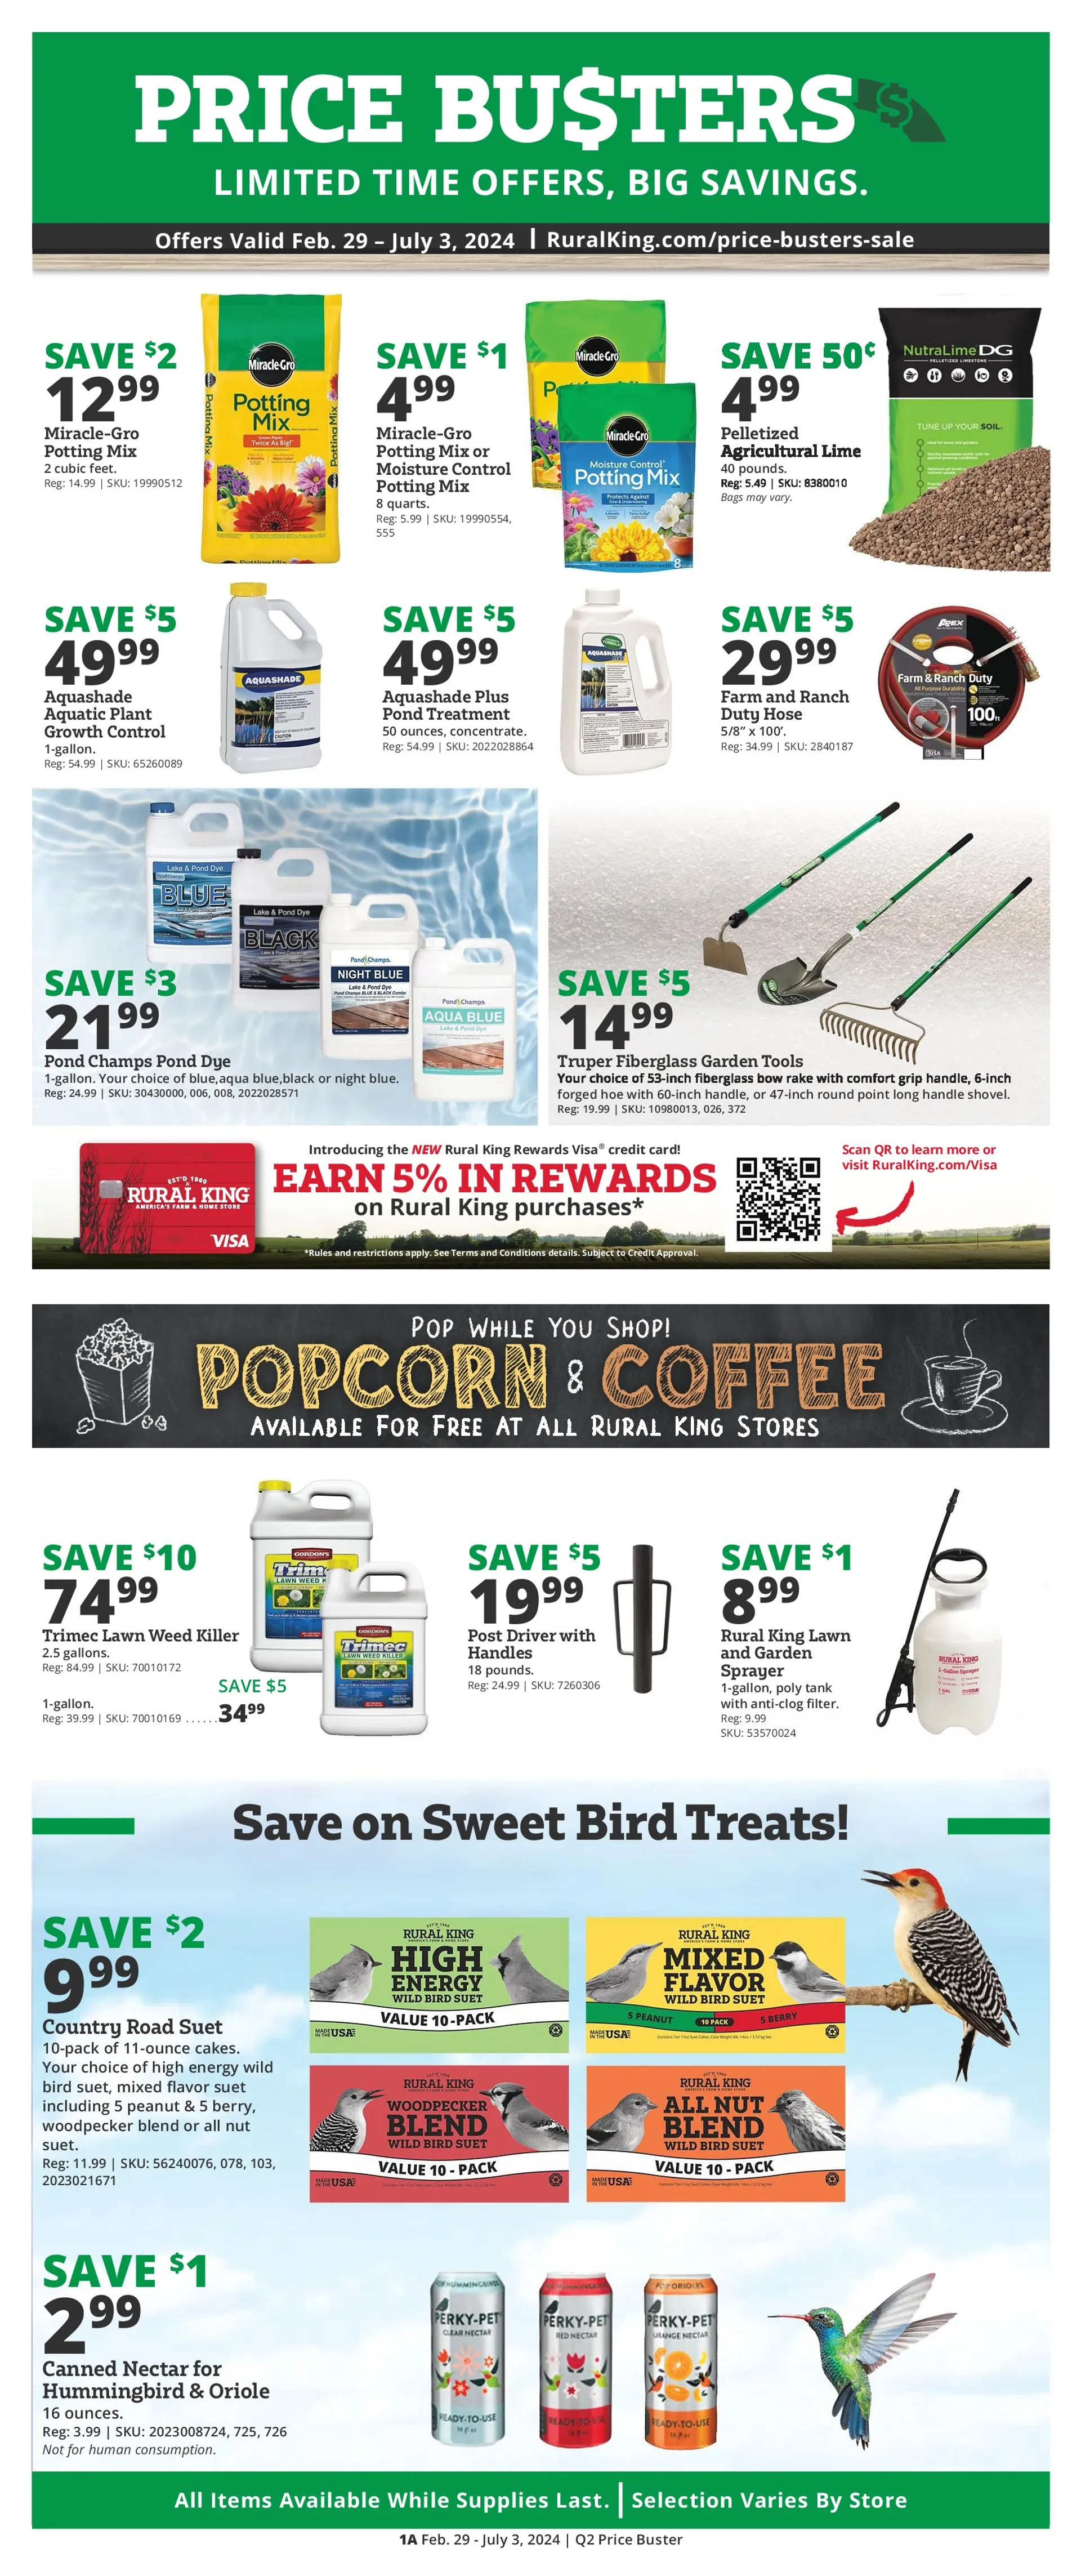 Weekly ad RURAL KING SALES from February 29 to July 3 2024 - Page 1